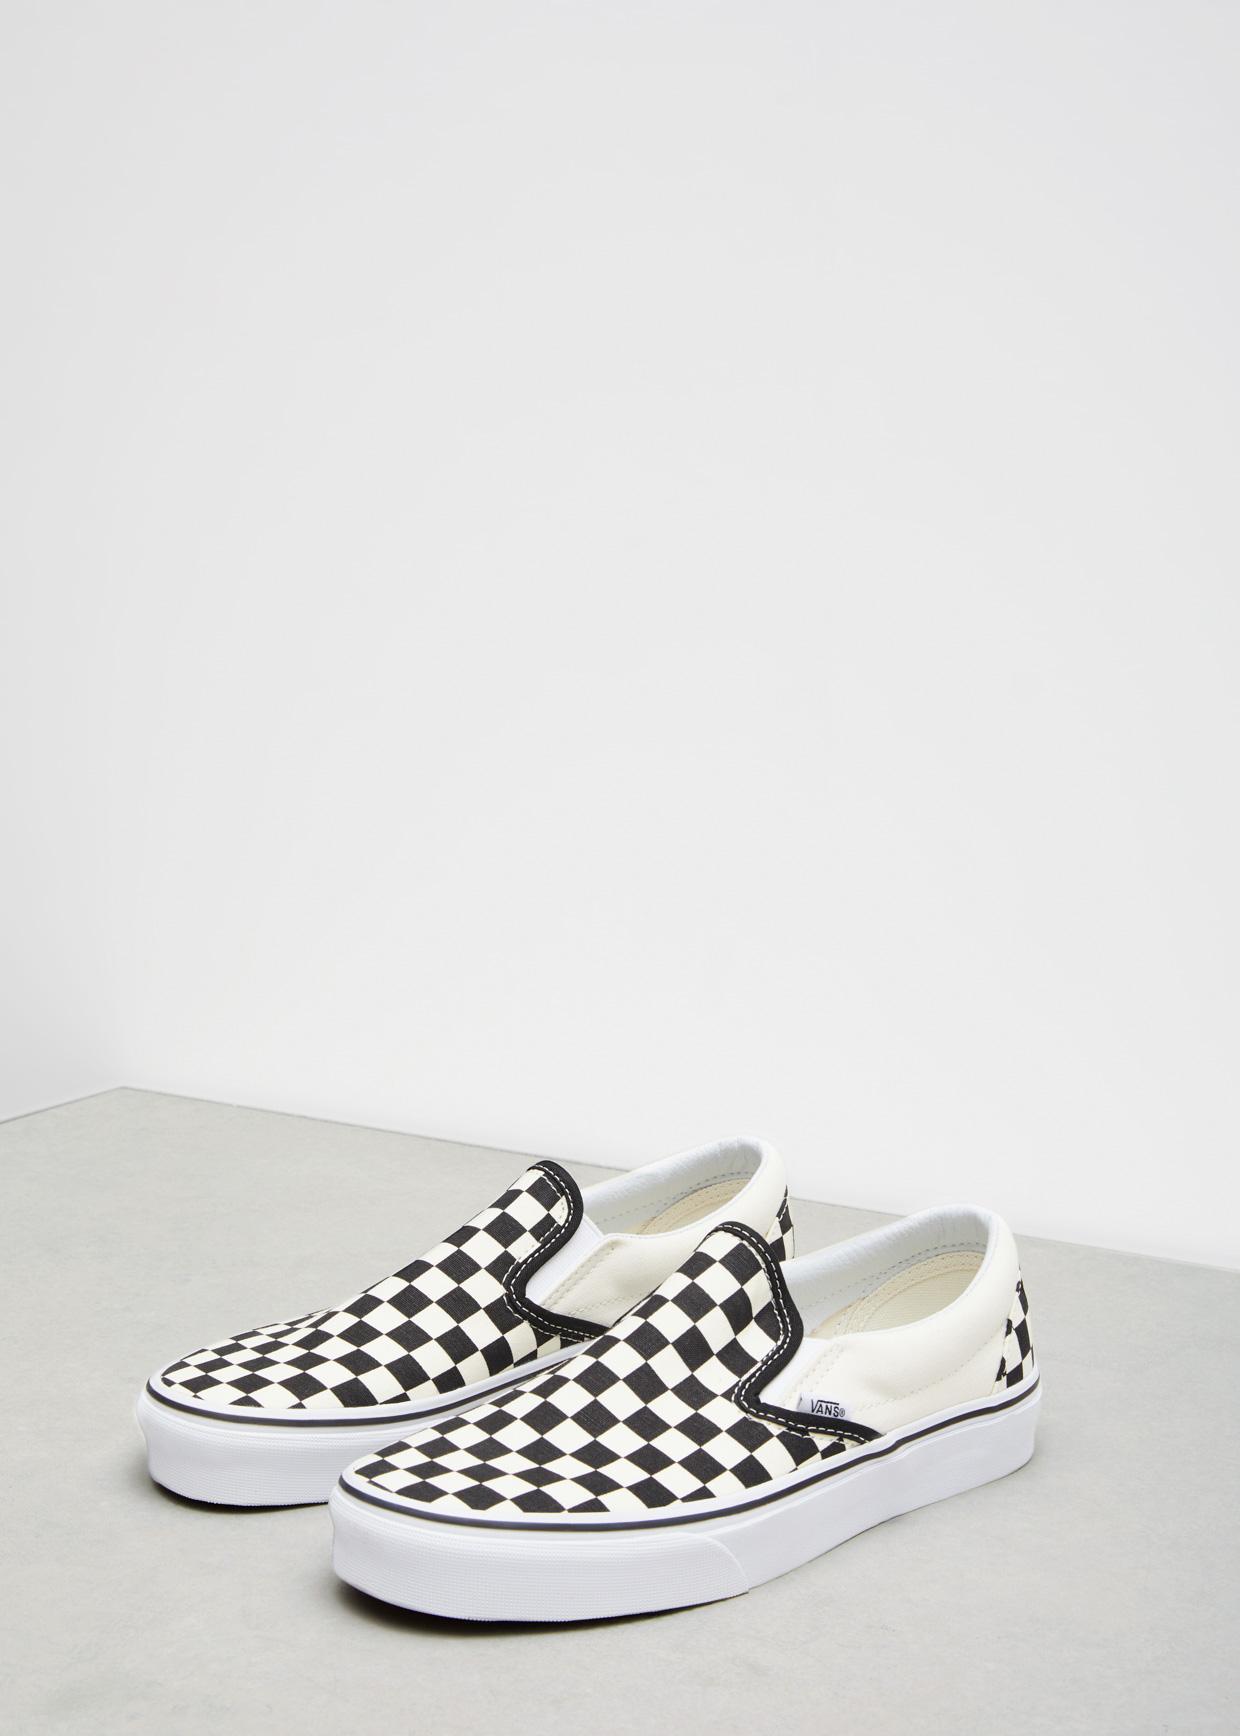 Vans Canvas Checkerboard Classic Slip-on Platform Shoes in White - Lyst